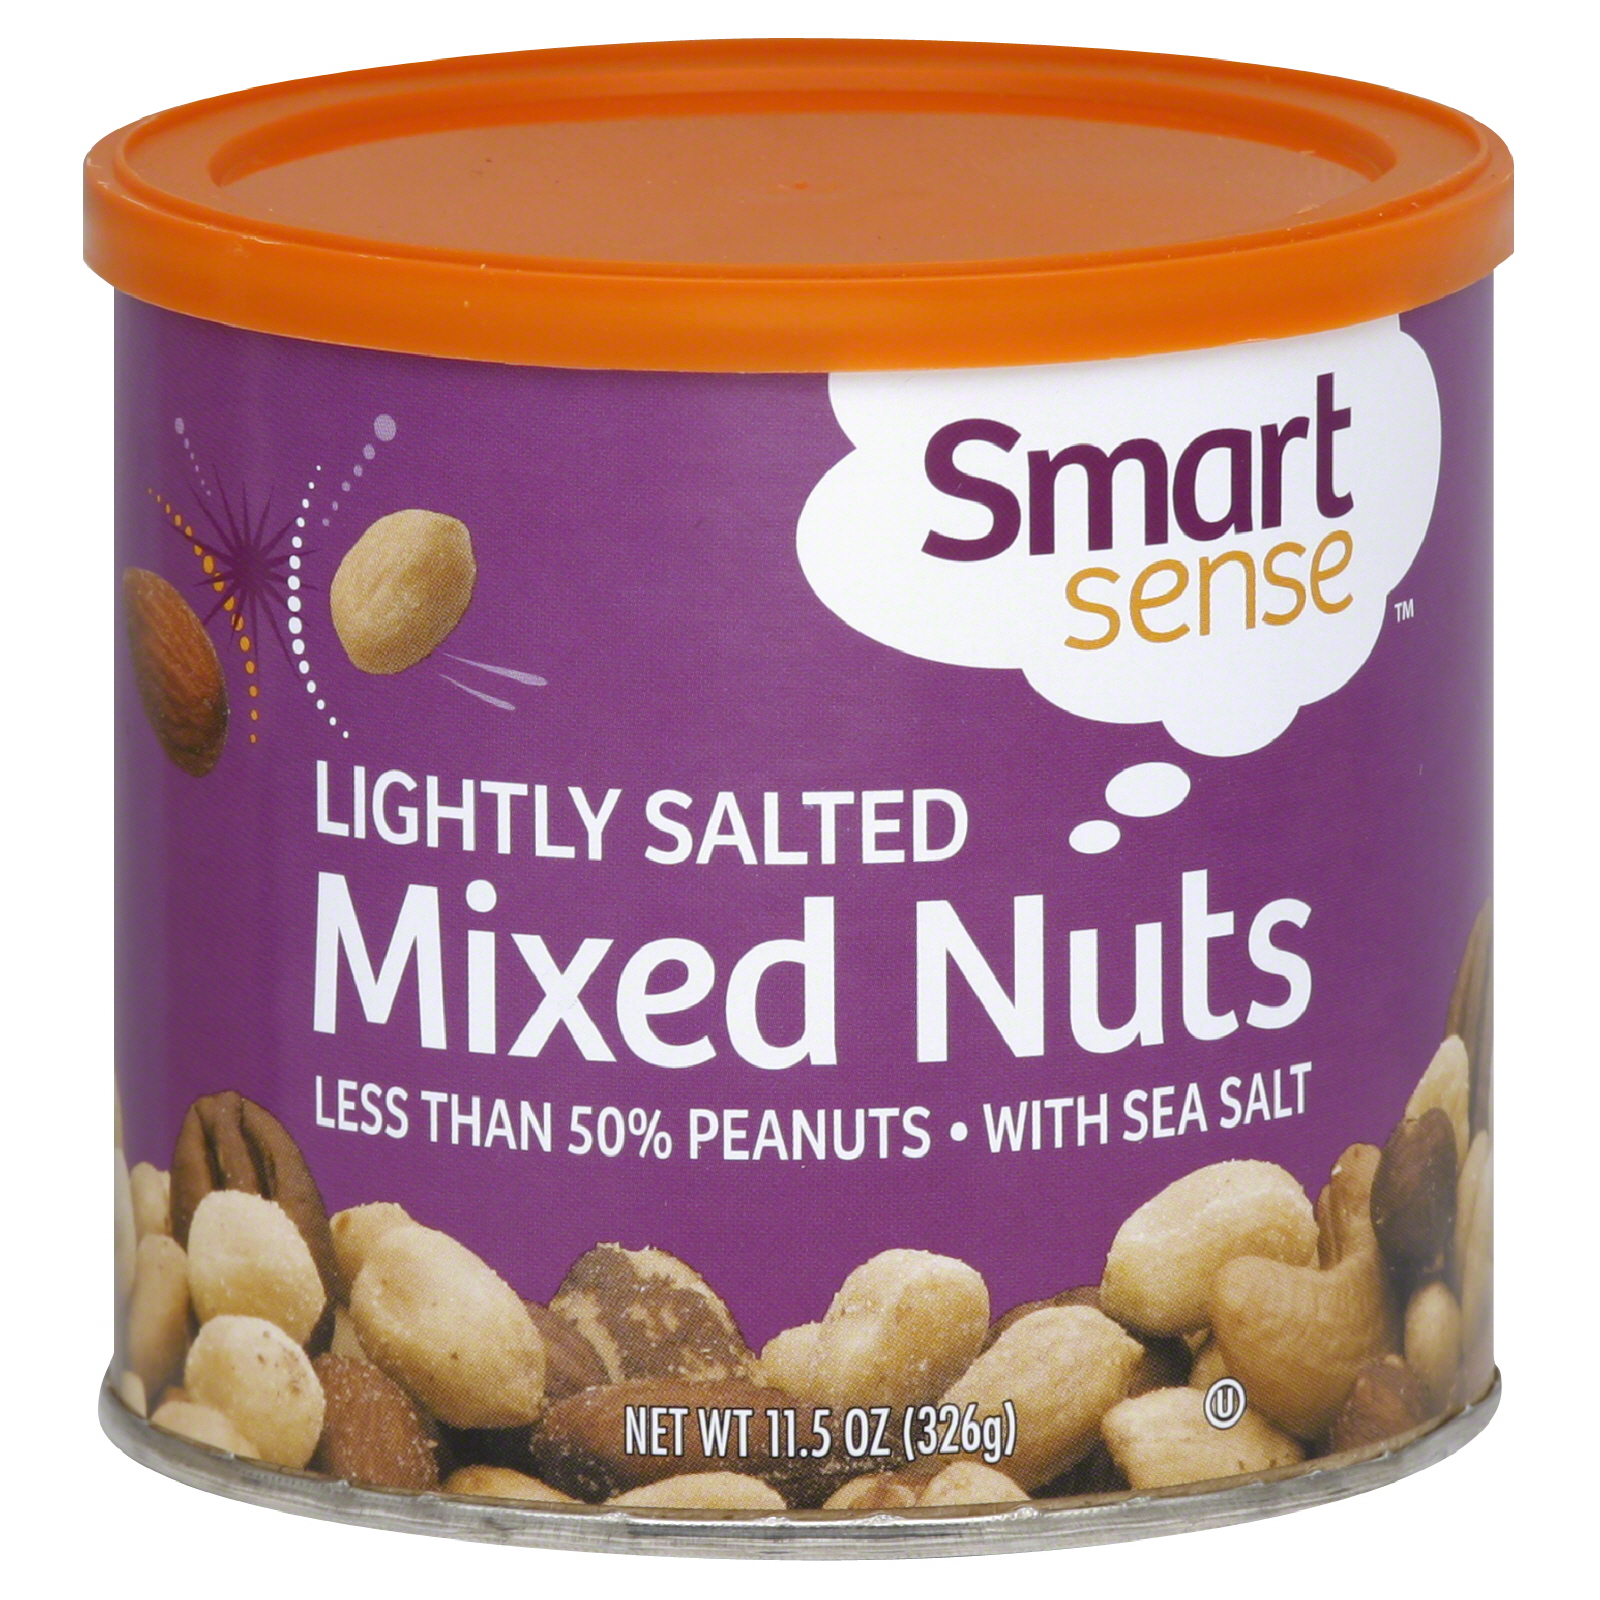 Smart Sense Mixed Nuts, Lightly Salted 11.5 oz (326 g)